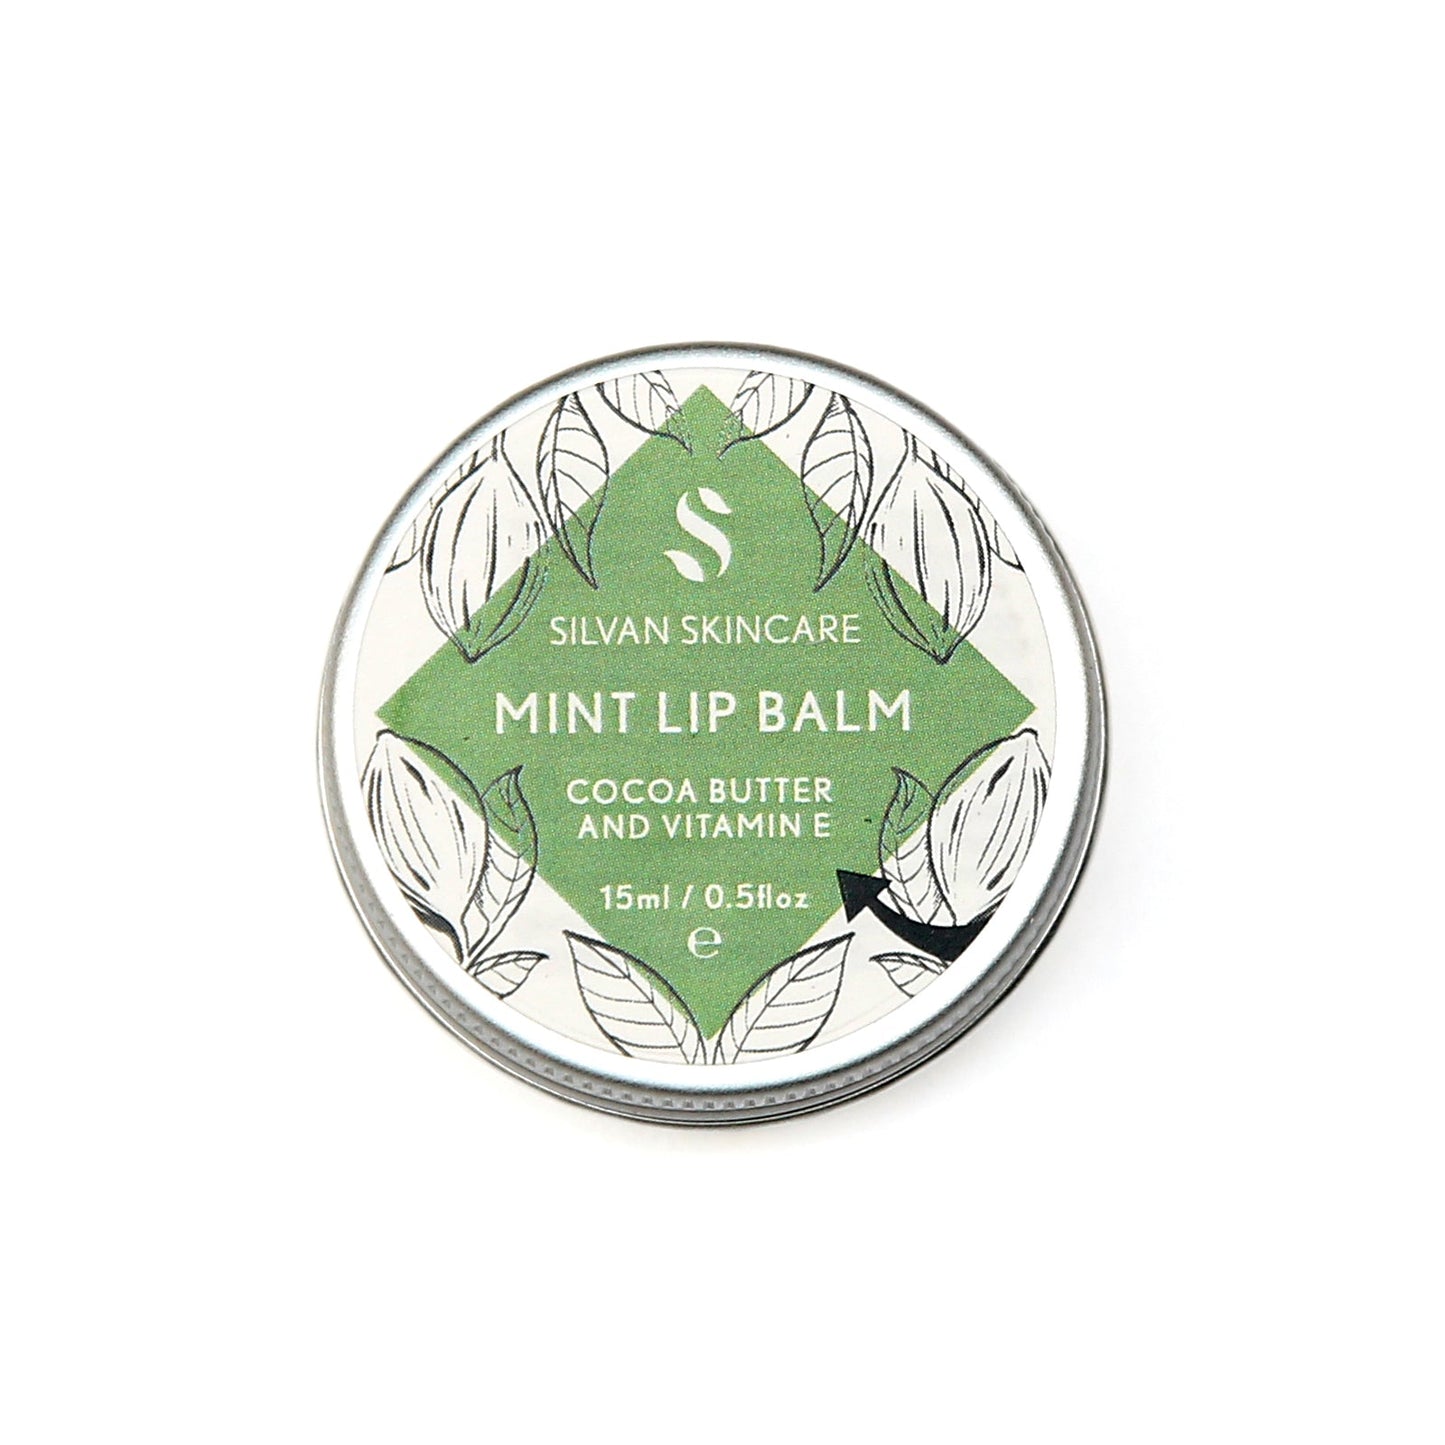 Single aluminium tin of the Silvan Skincare mint lip balm. The label is round and white with a central diamond in green and botanical illustrations around it.